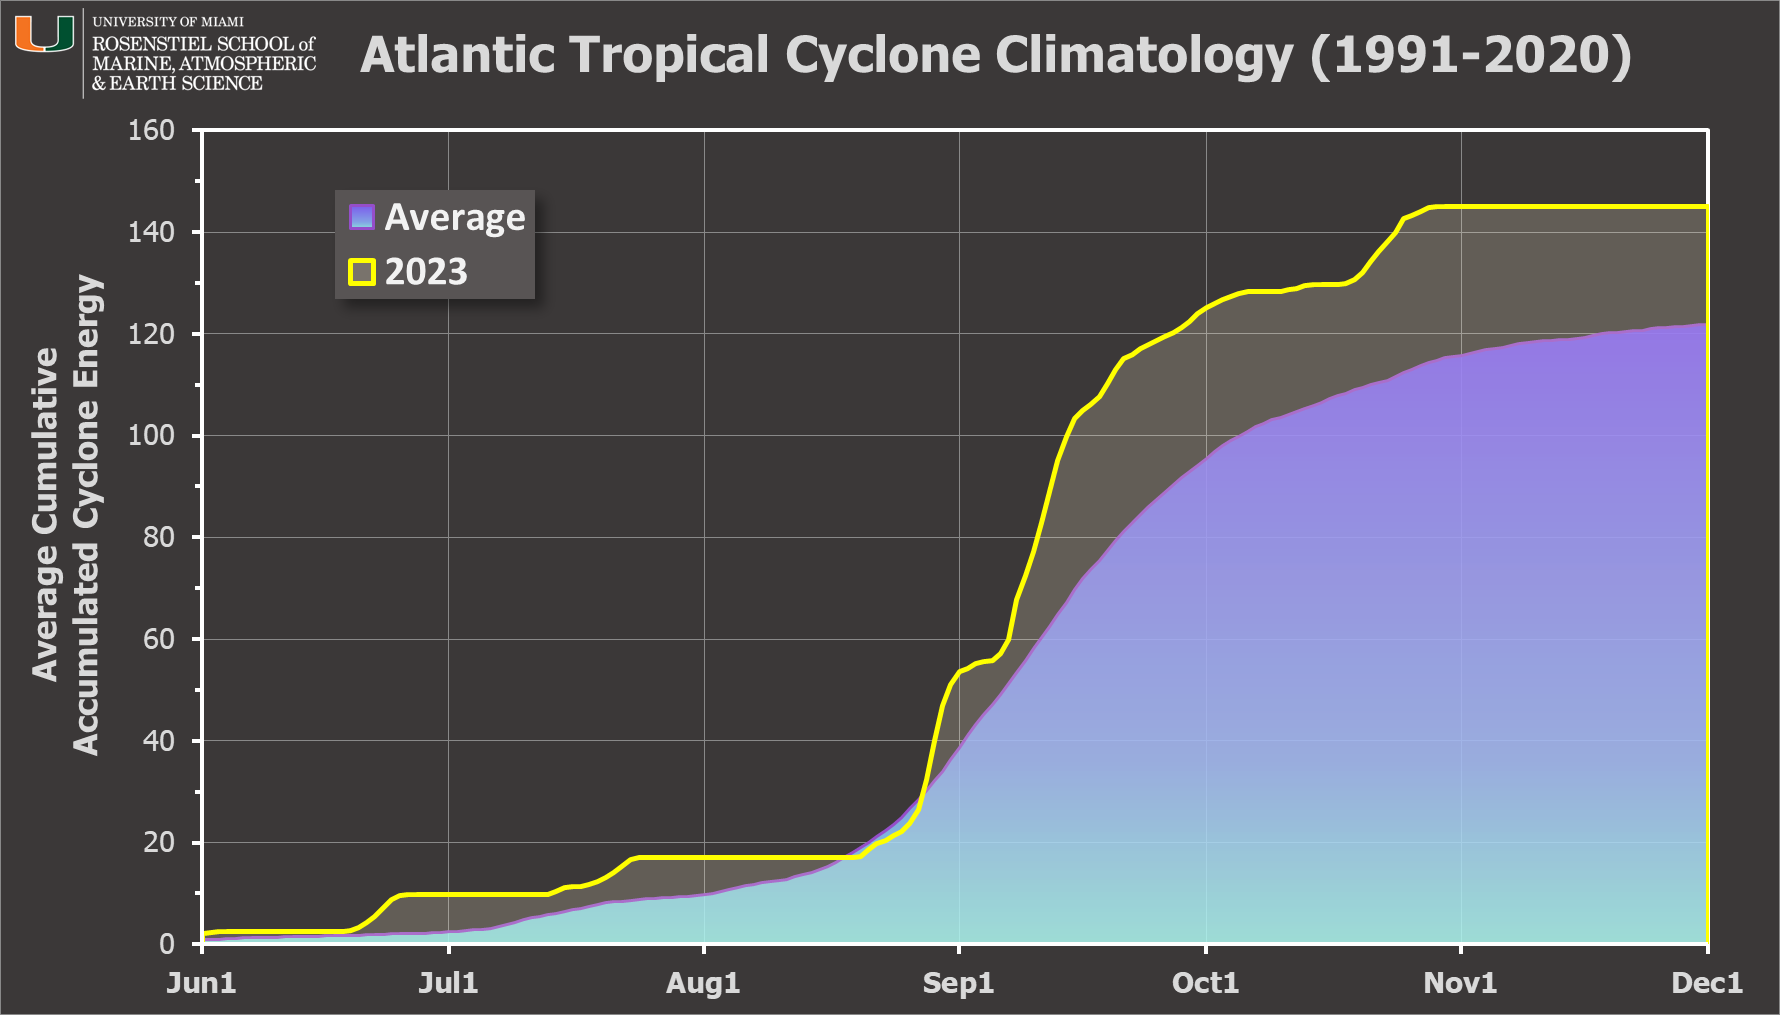 Accumulated Cyclone Energy is a metric used by various agencies to express the energy released by a tropical cyclone during its lifetime.